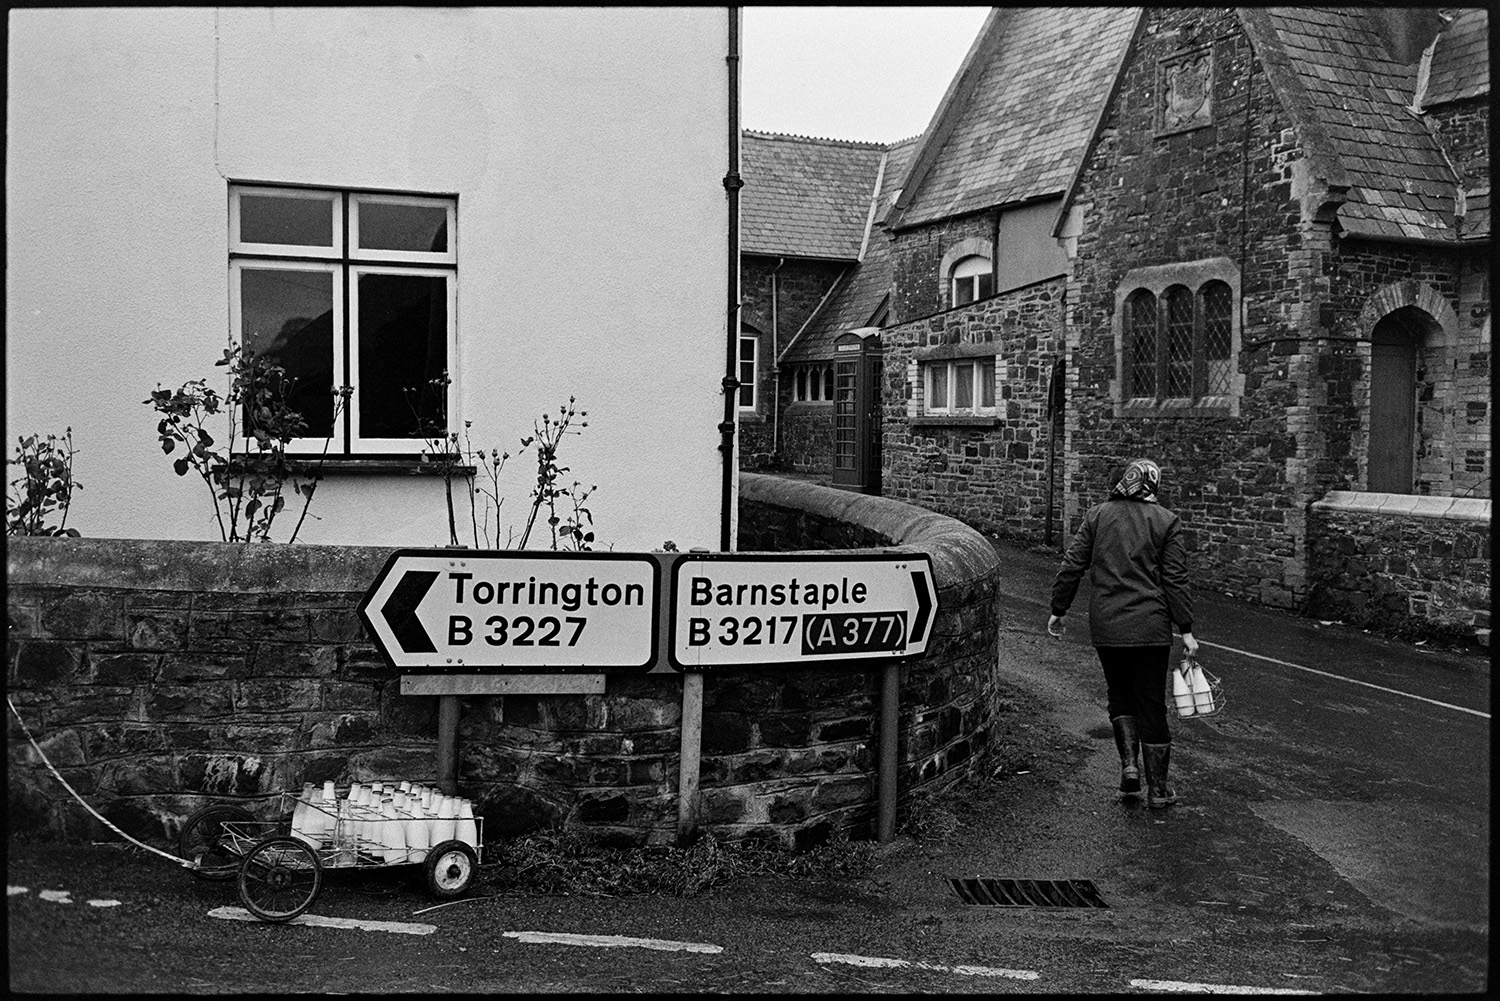 Woman doing milk round in village, chatting to customers. <br />
[Jane Woolacott delivering milk to houses in Atherington. She is transporting the milk bottles on  trolley which is parked by road signs.]